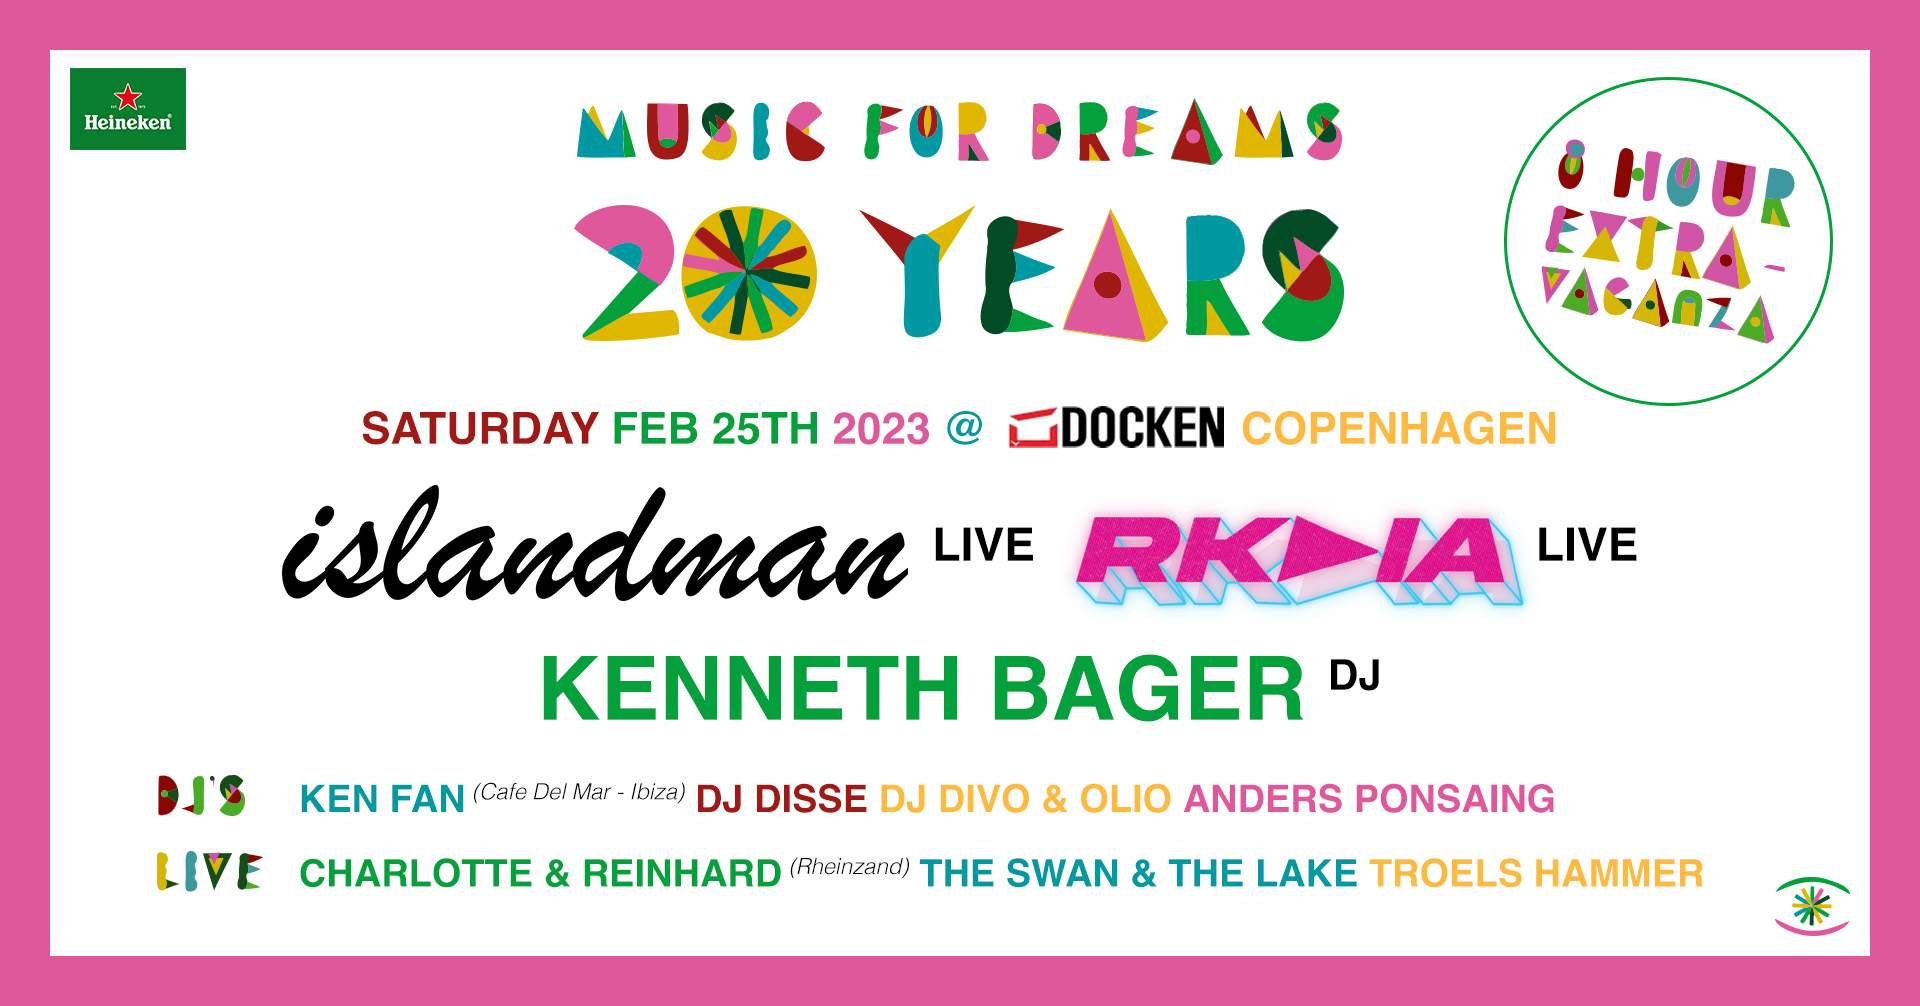 Music For Dreams - 20 Years Event with Islandman (Live) RKDIA (Live) Kenneth Bager (DJ) & More - フライヤー表